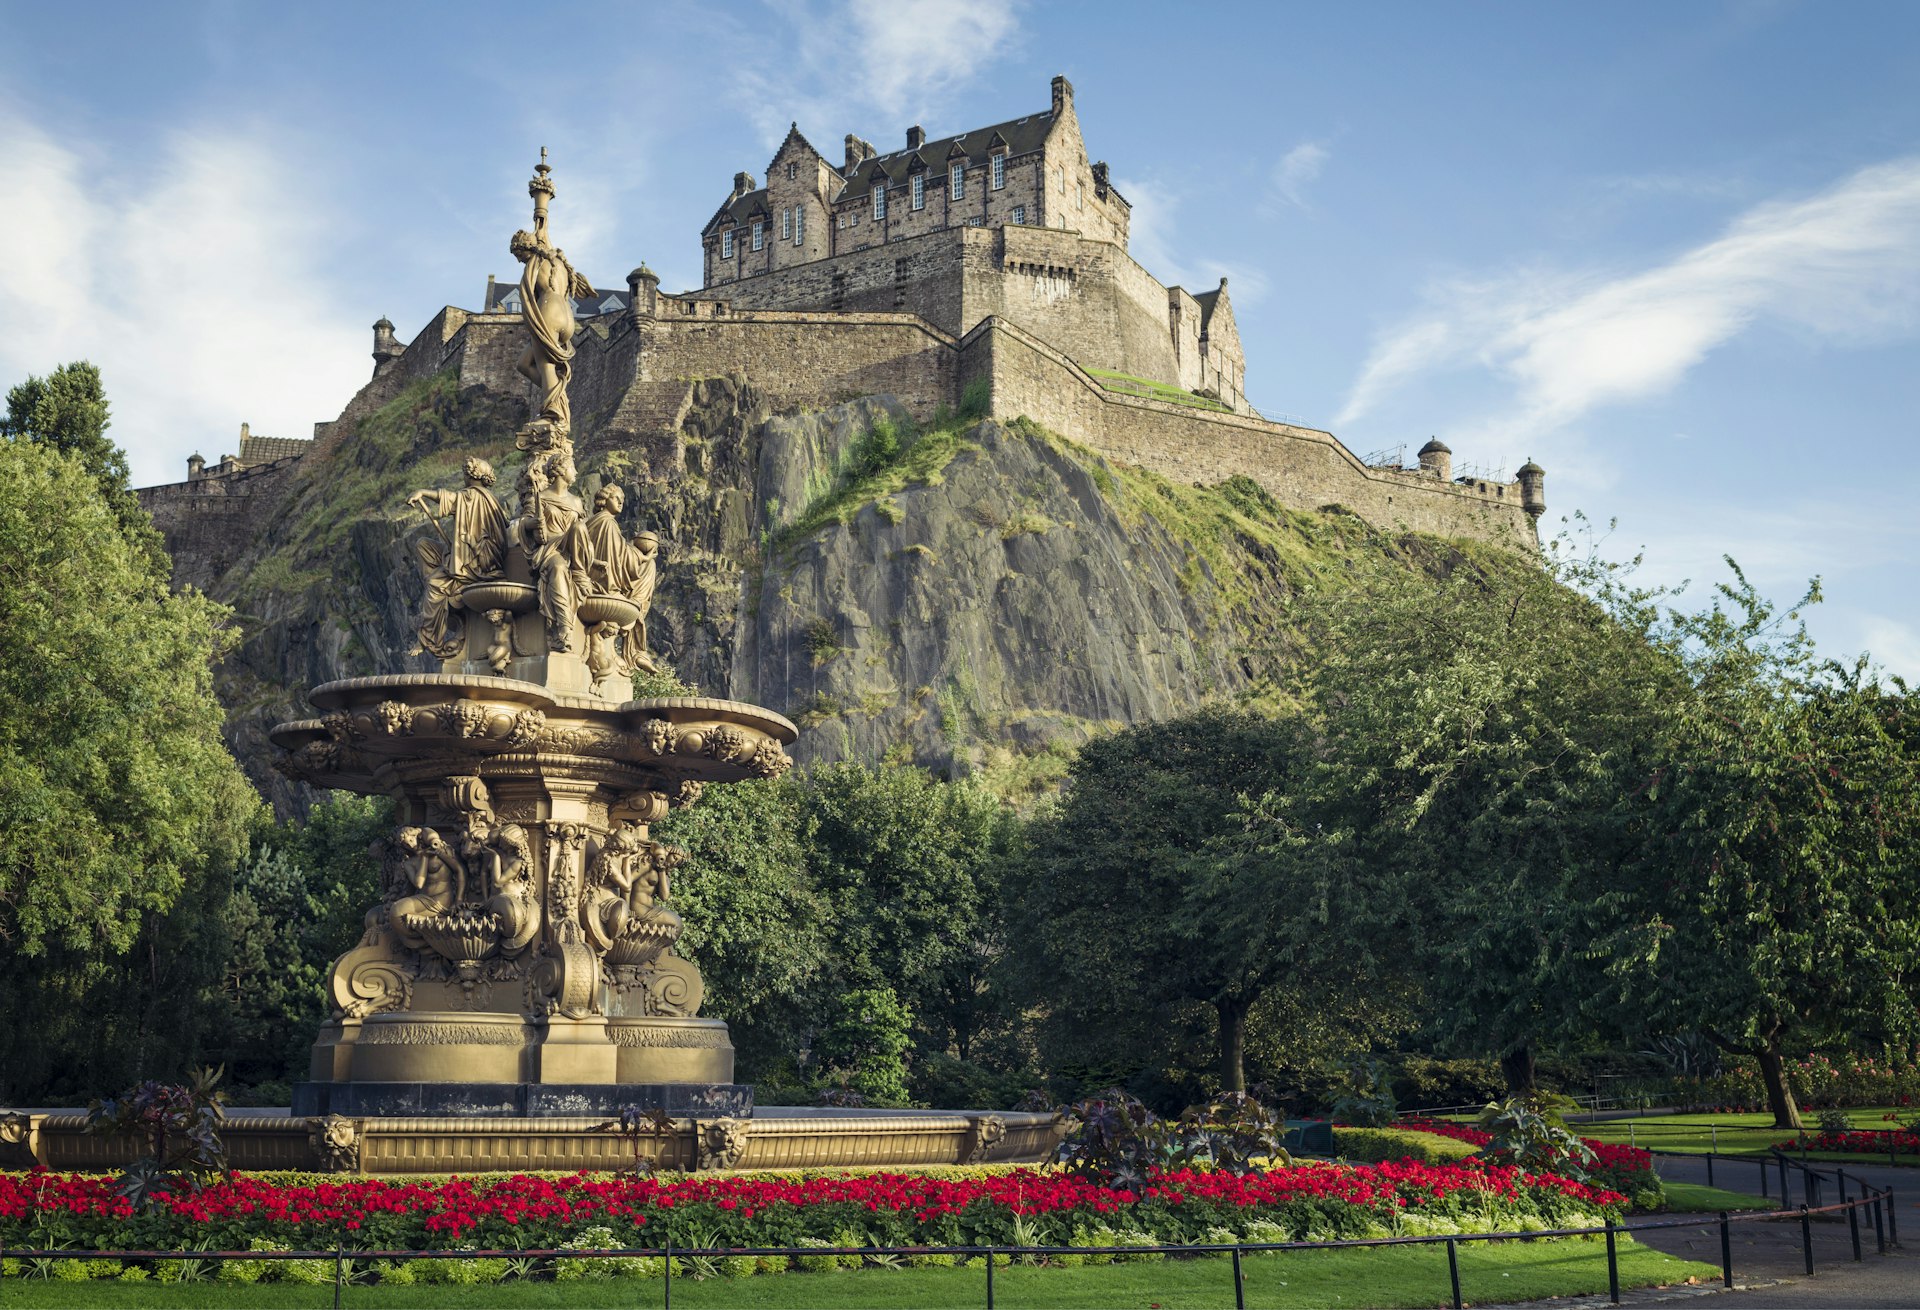 Flowers surrounding the ornate Ross Fountain in Princes Street Gardens in Edinburgh, with Edinburgh Castle in the background